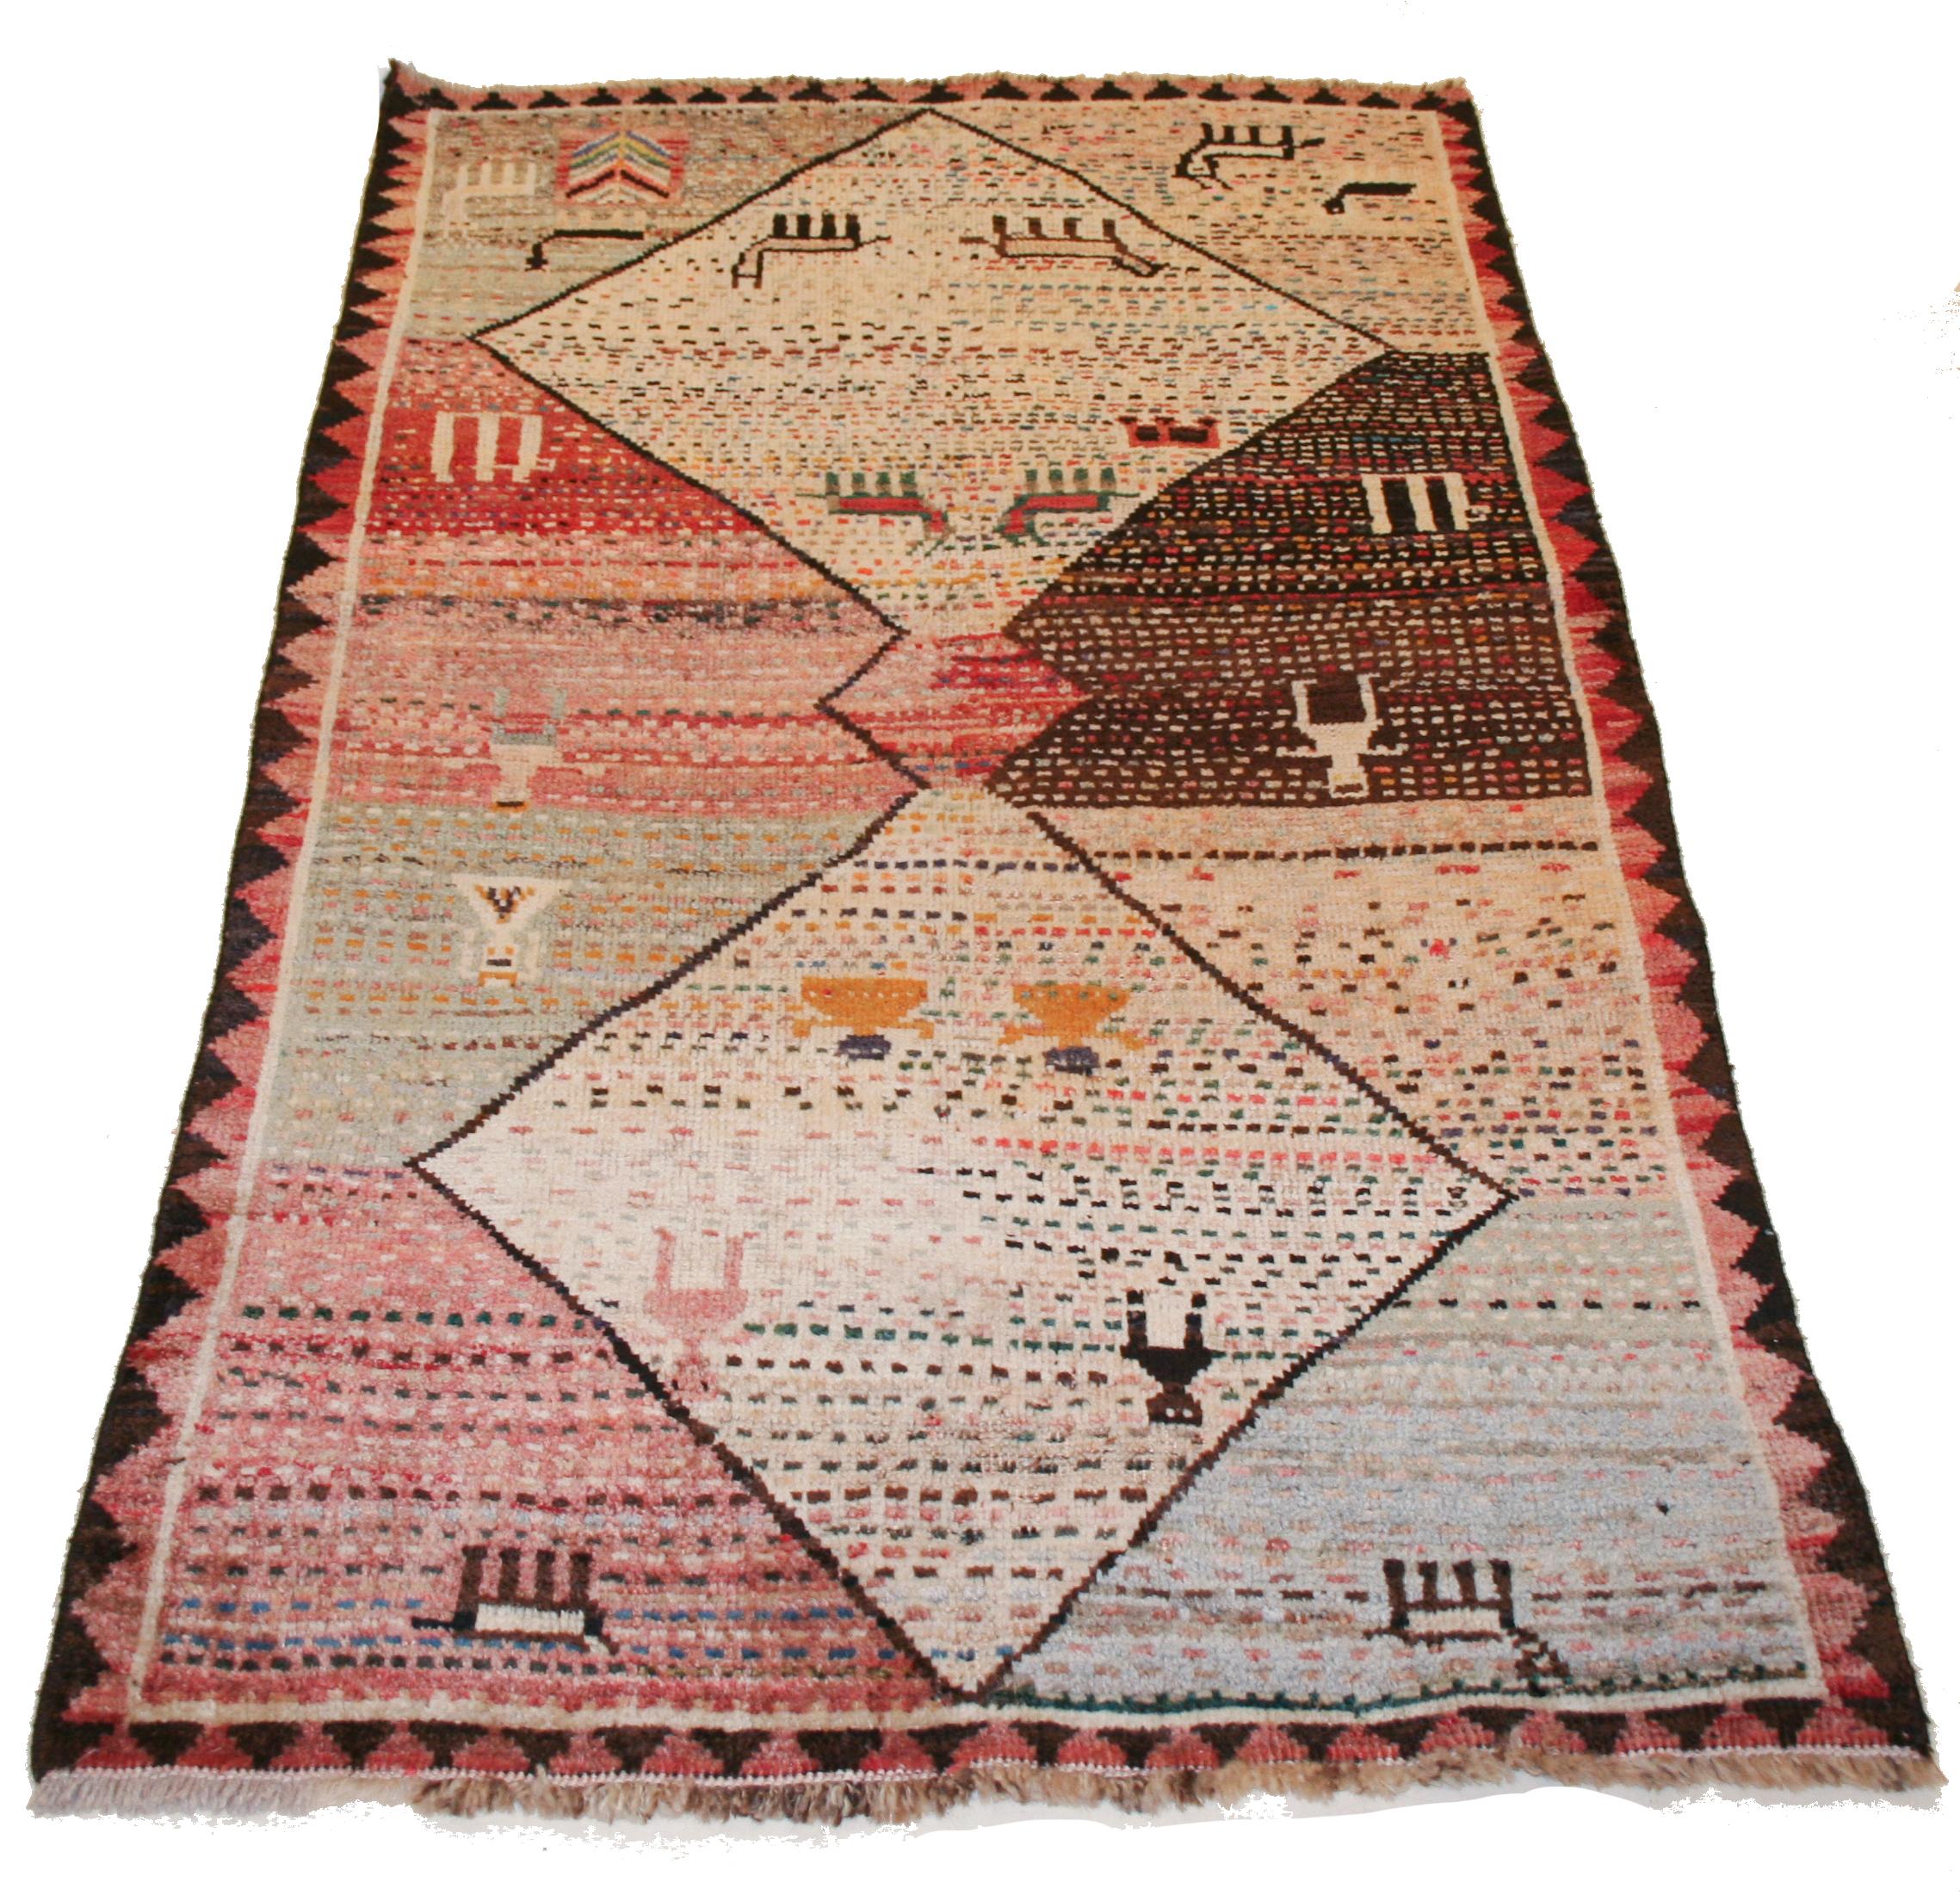 The naive character of this charming, diminutive tribal rug is exactly what distinguishes it from the plethora of commercial oriental rugs. The diamond design field is completely filled with small dots, alternated to other geometric devices typical